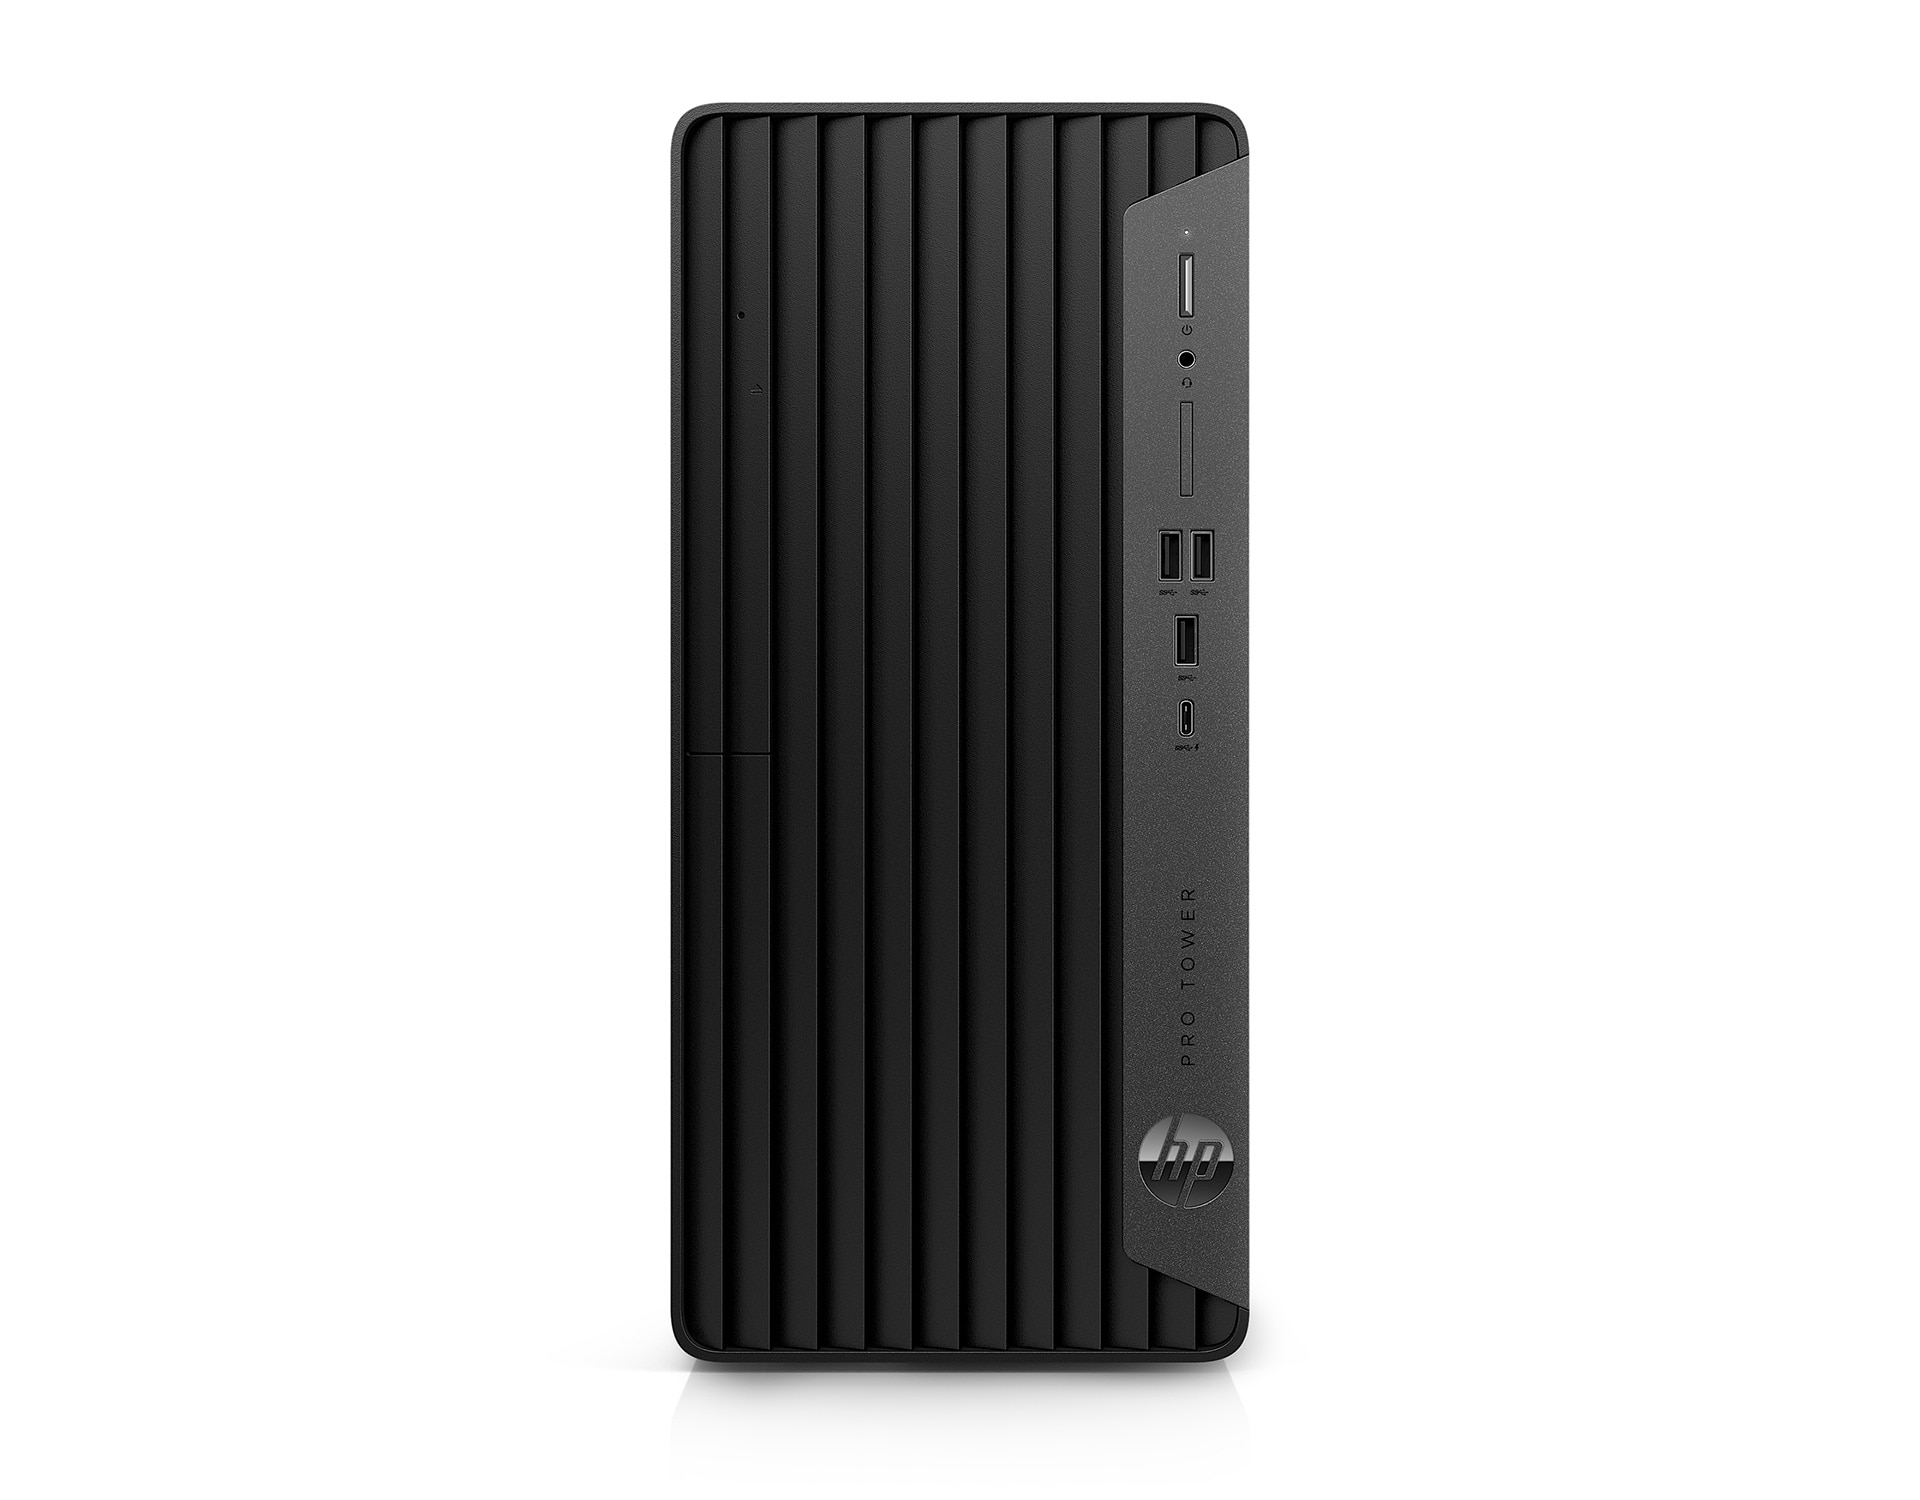 HP Pro Tower 400 G9